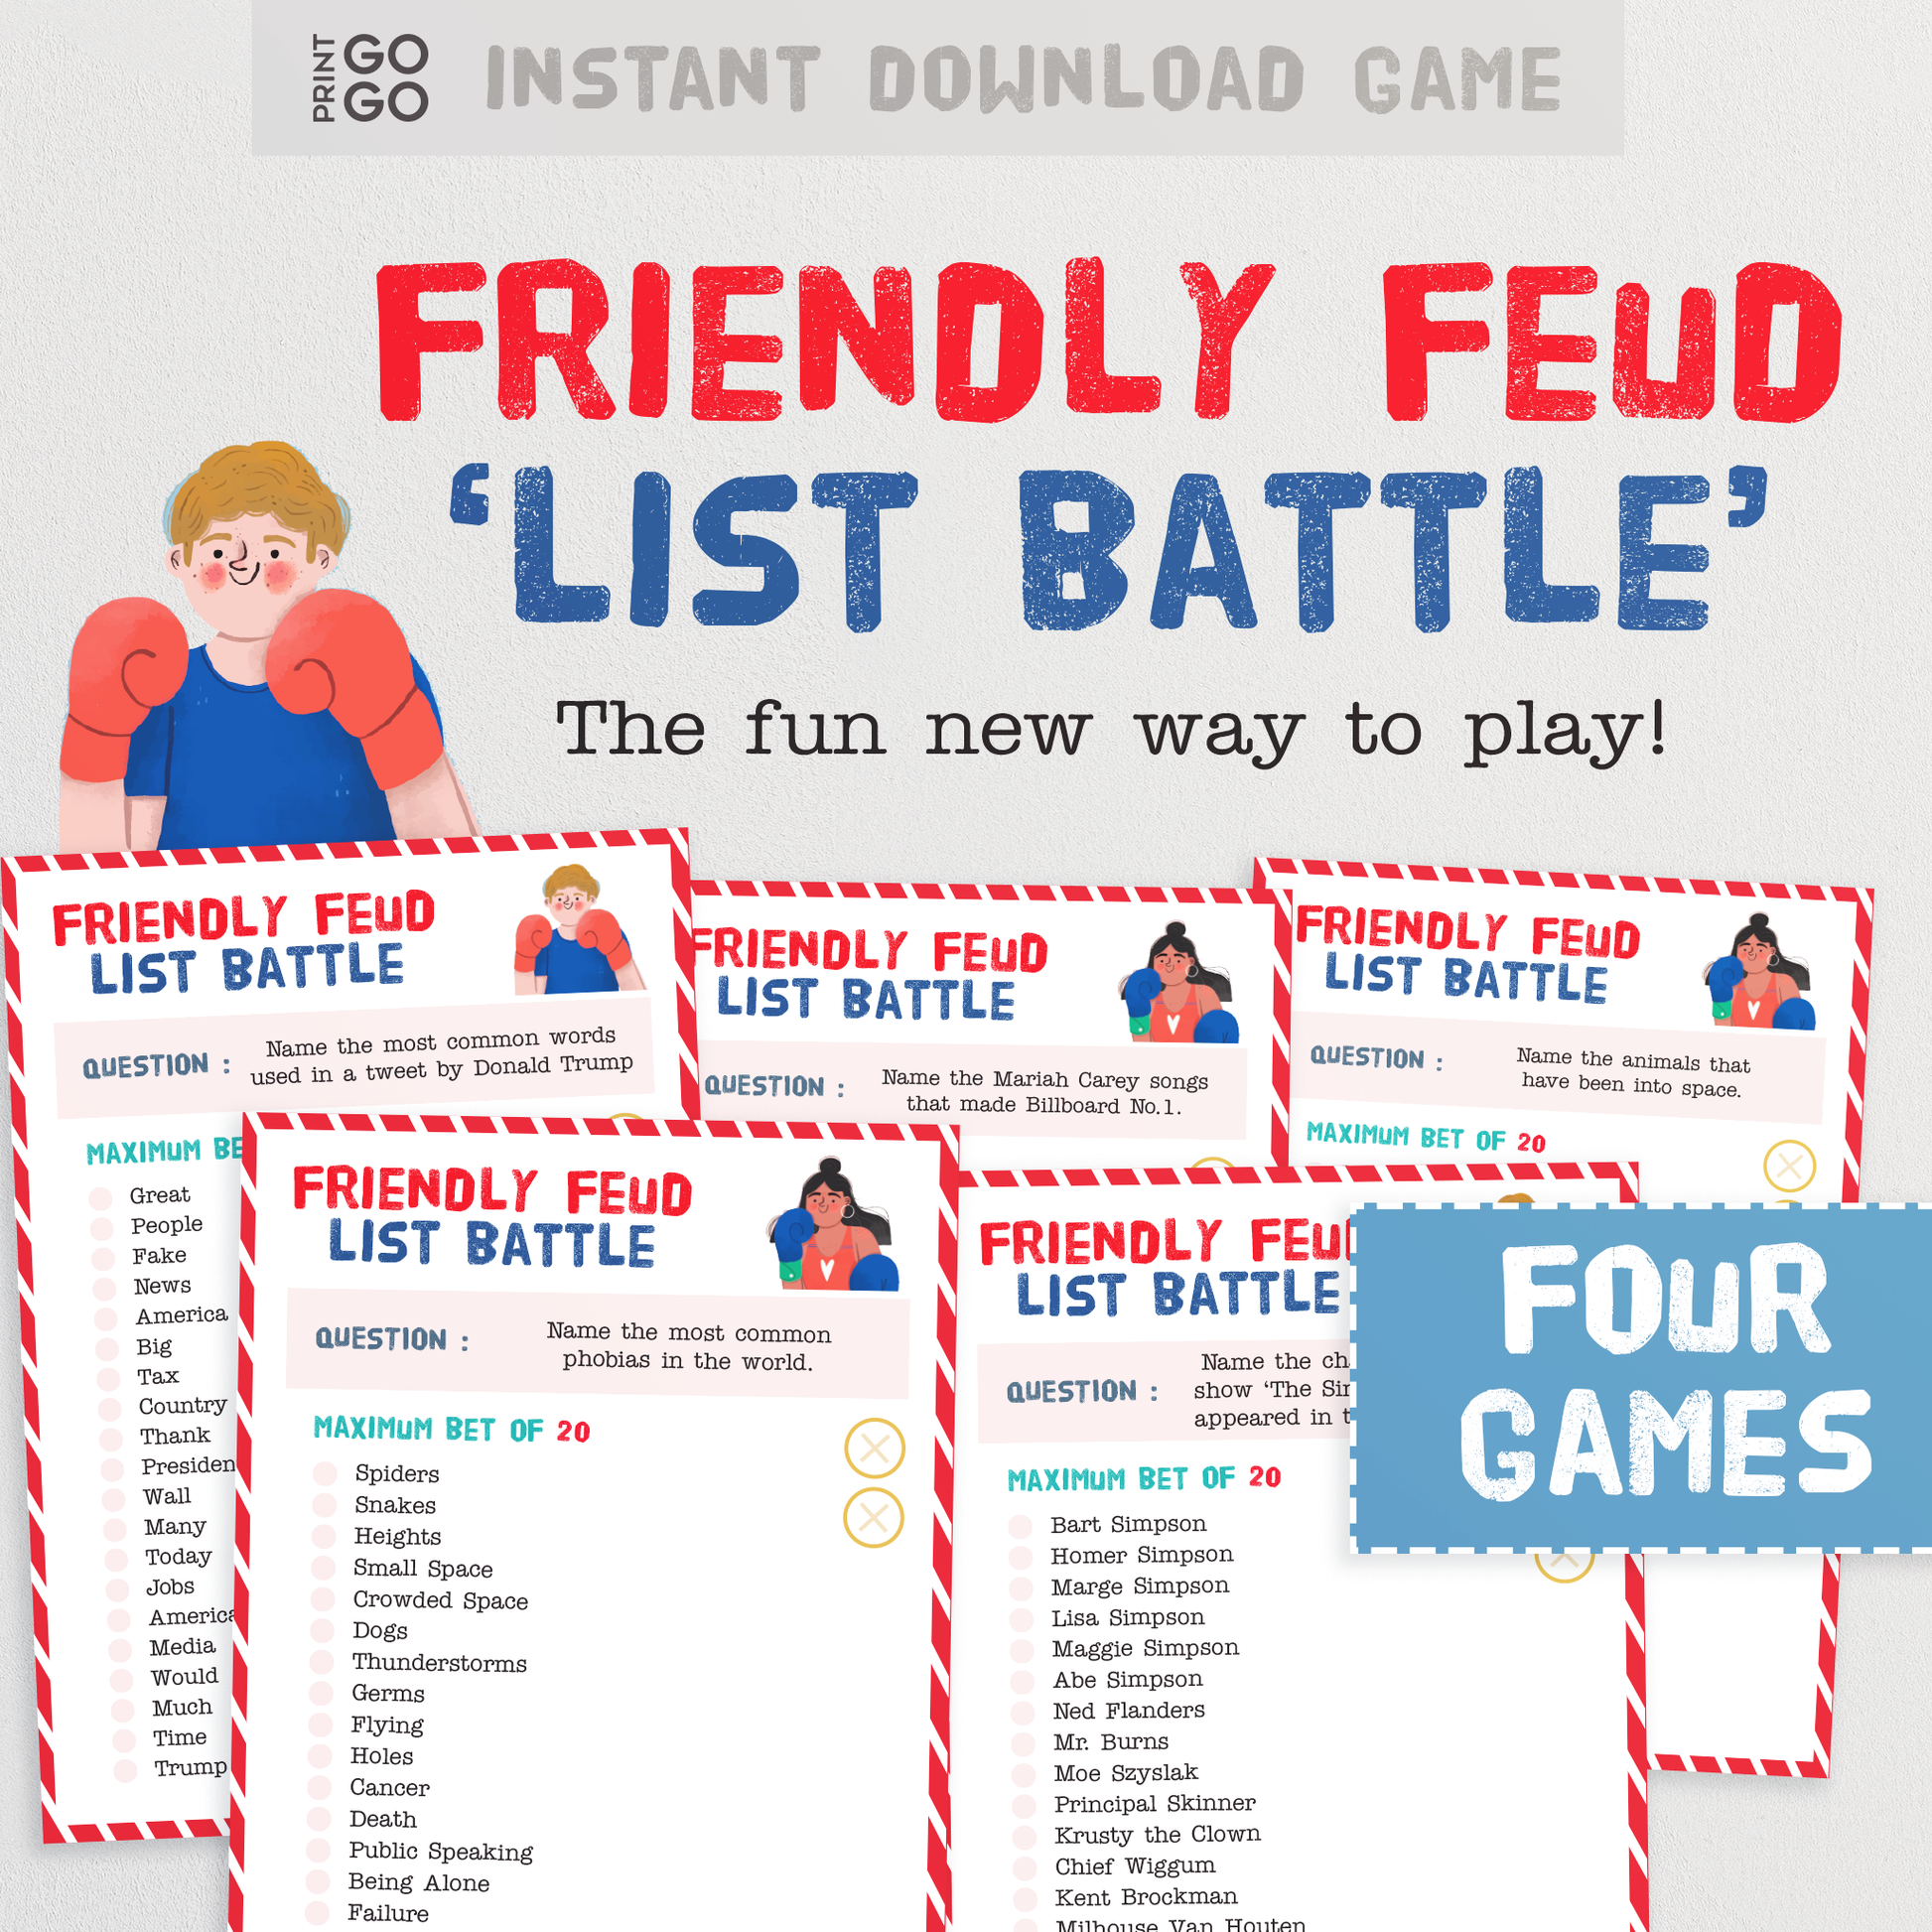 Friendly Feud 'List Battle' - Group Game of Questions, Betting and Stealing Lists!